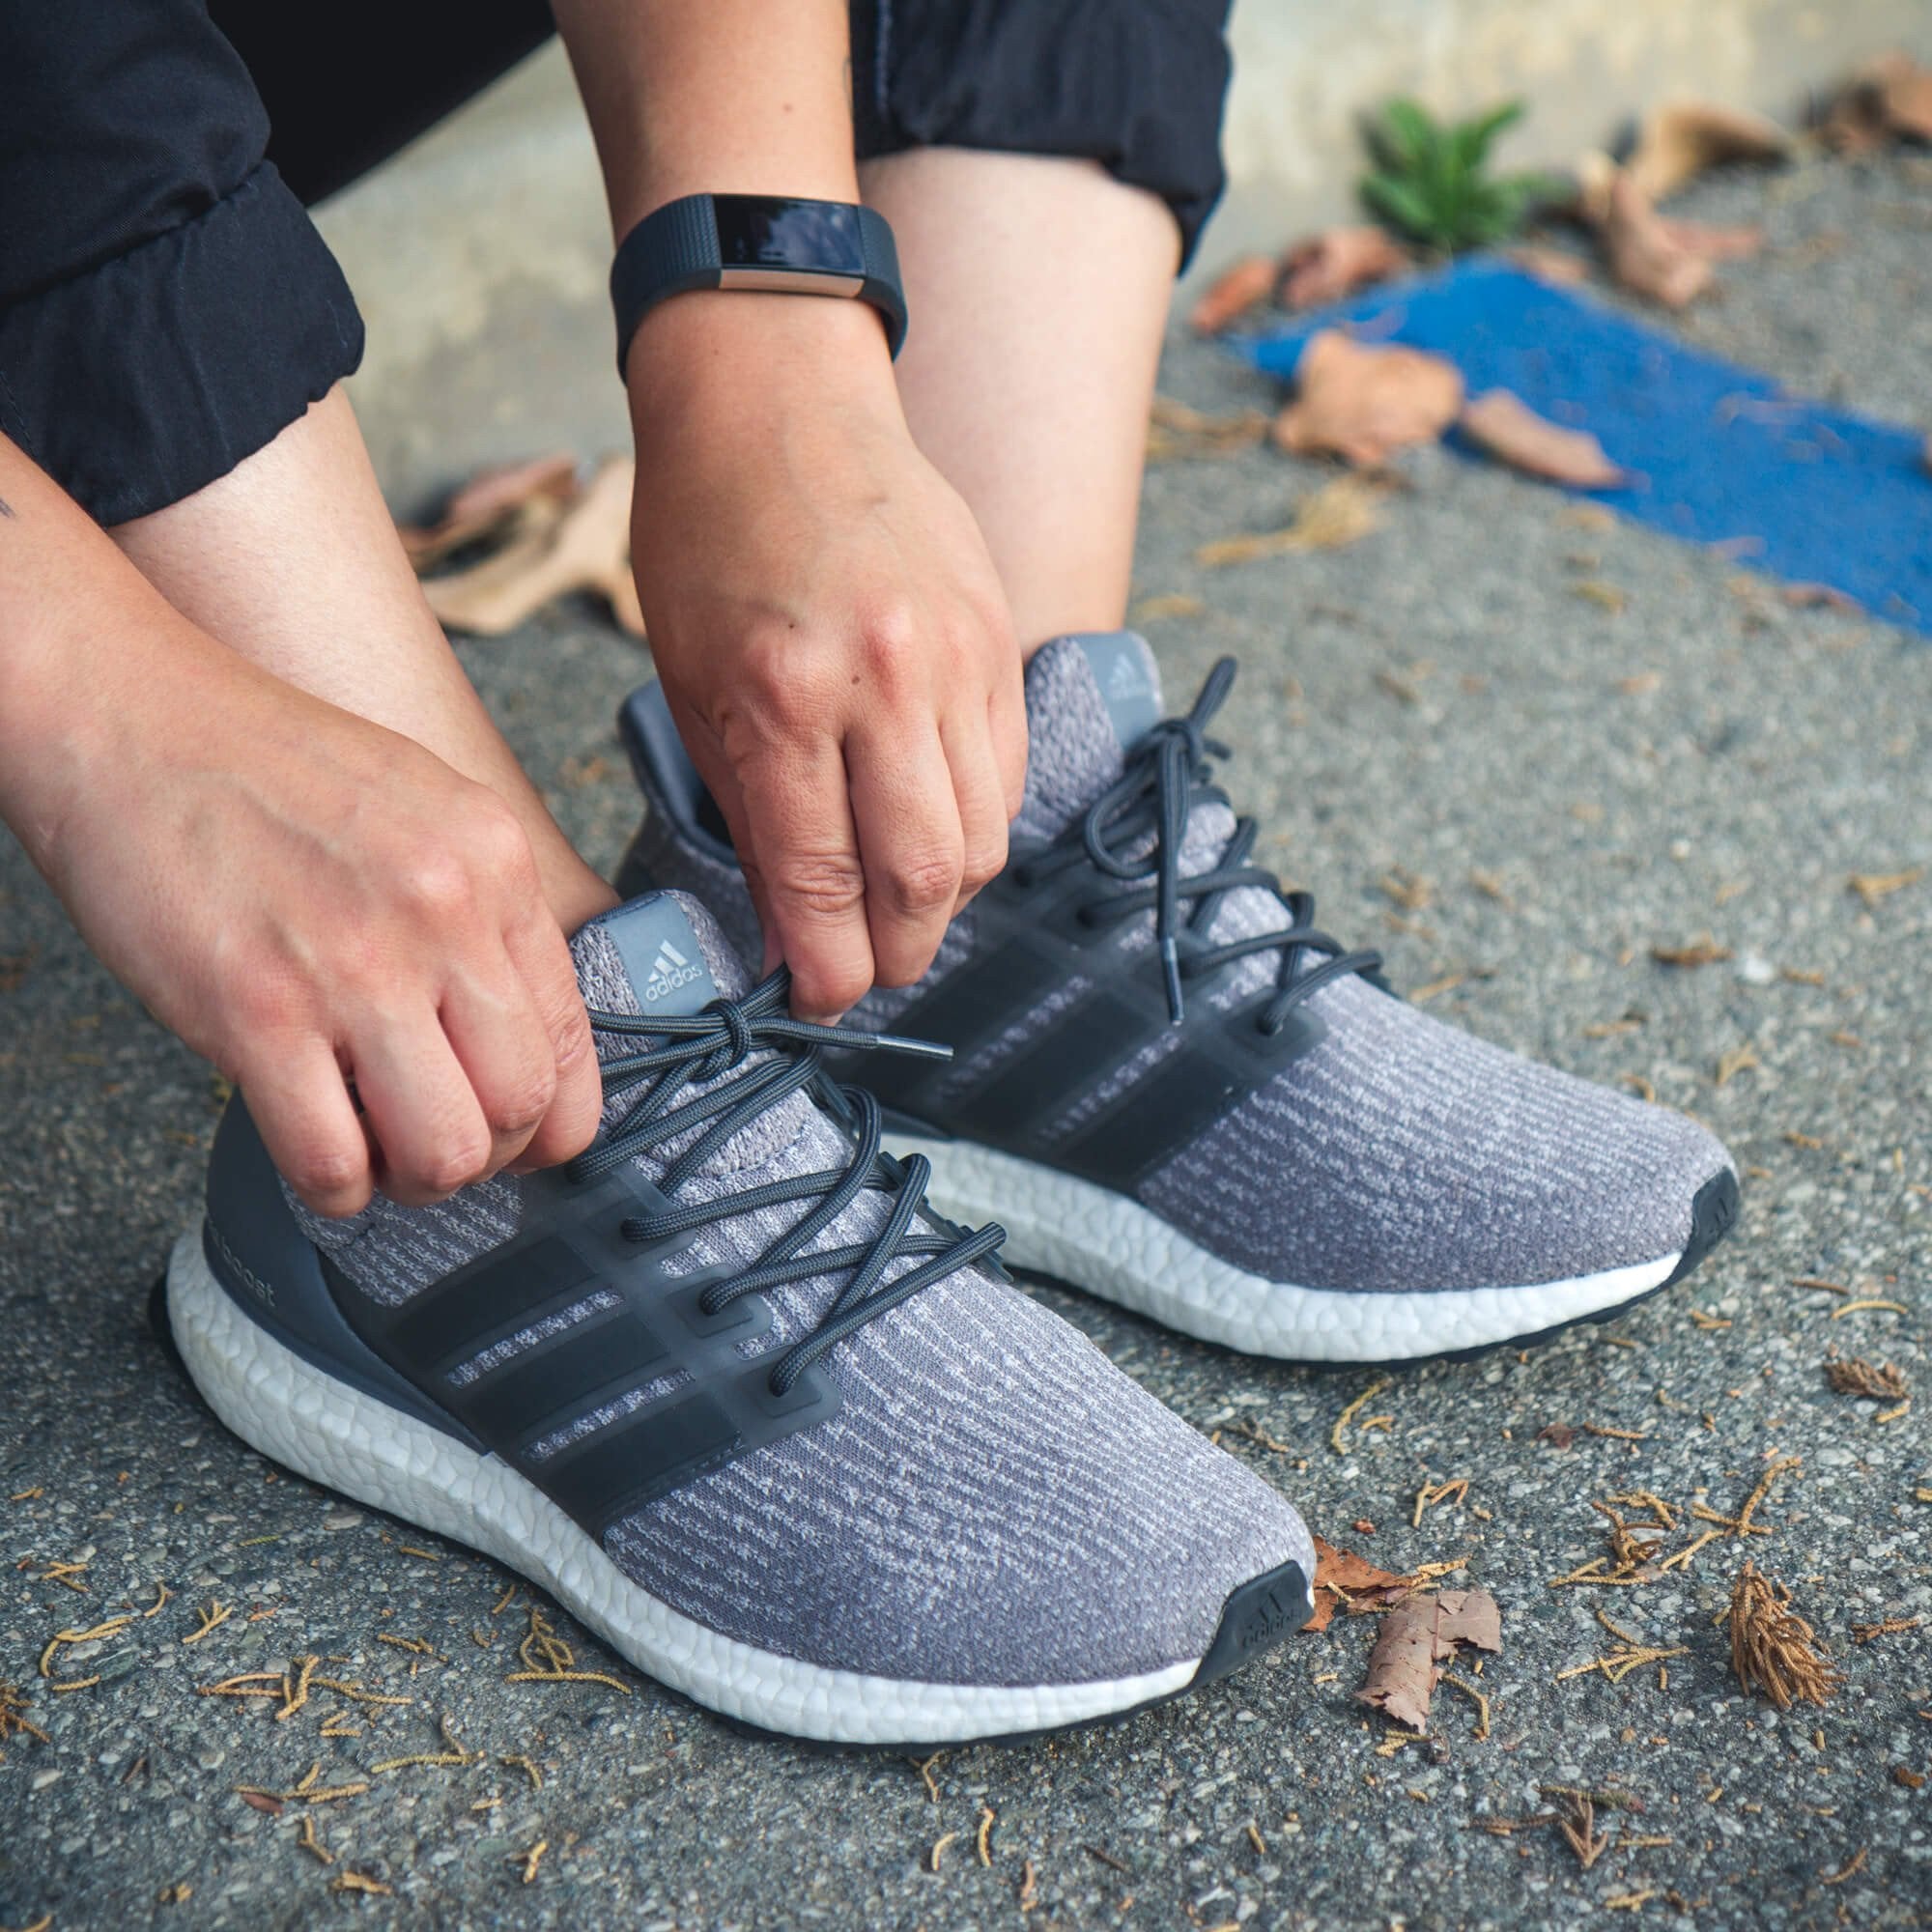 3 Easy Ways to Tie an Adidas Ultra Boost - wikiHow